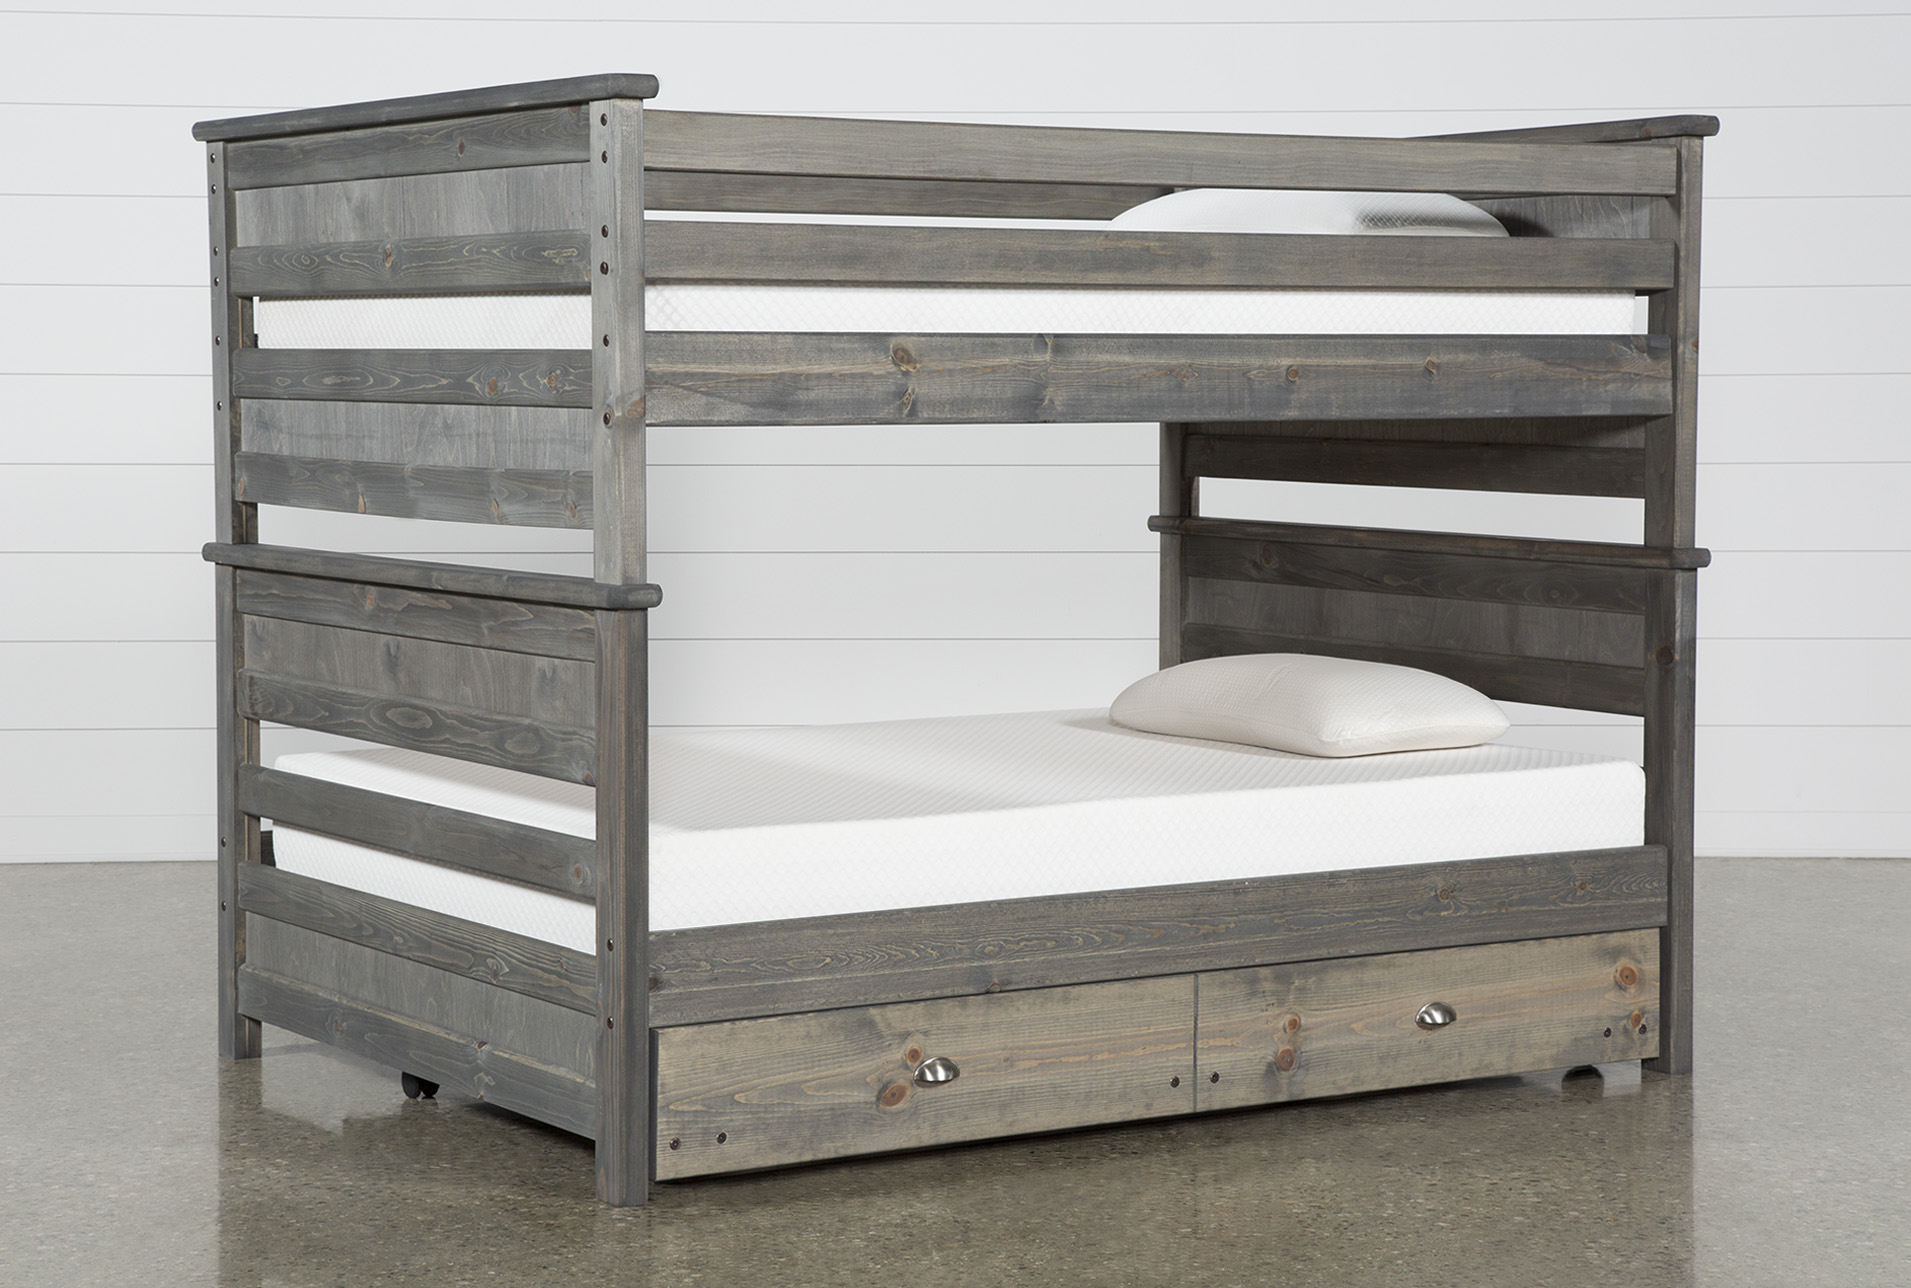 double single bunk bed with trundle